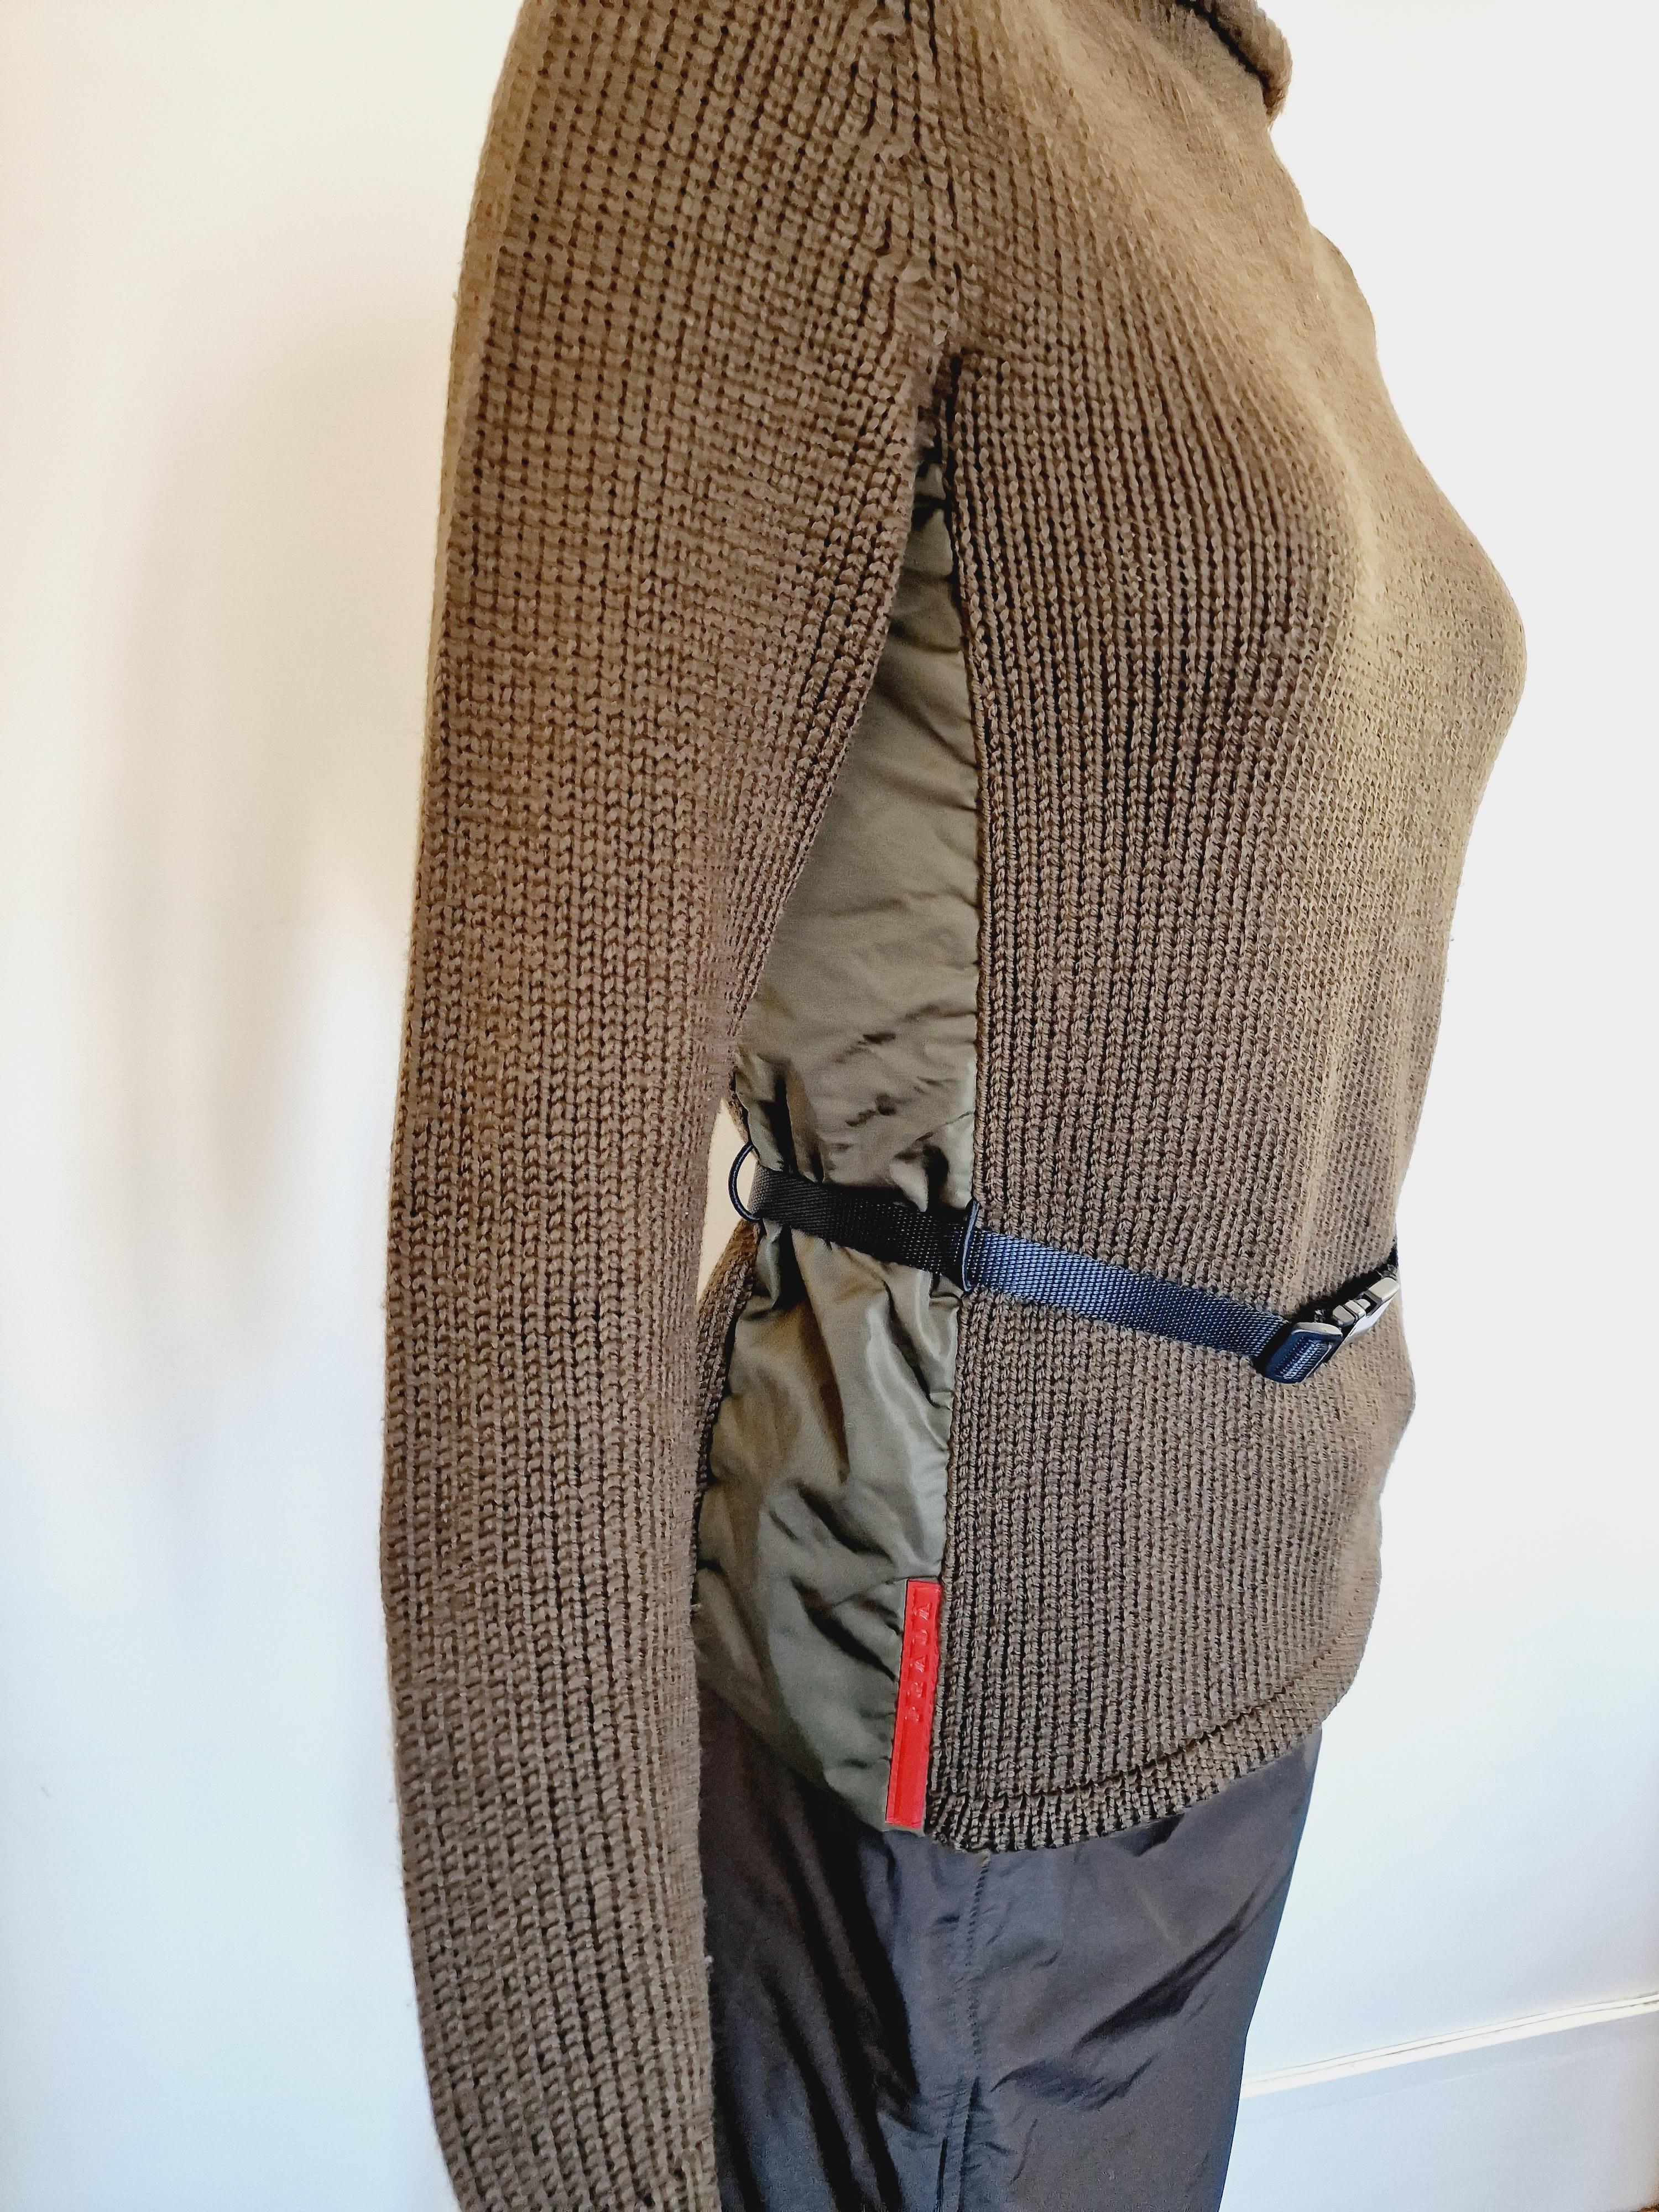 Prada Sport Cargo Military Tactical Vintage 90s 80s Khaki Brown Skirt Top Dress In Excellent Condition For Sale In PARIS, FR